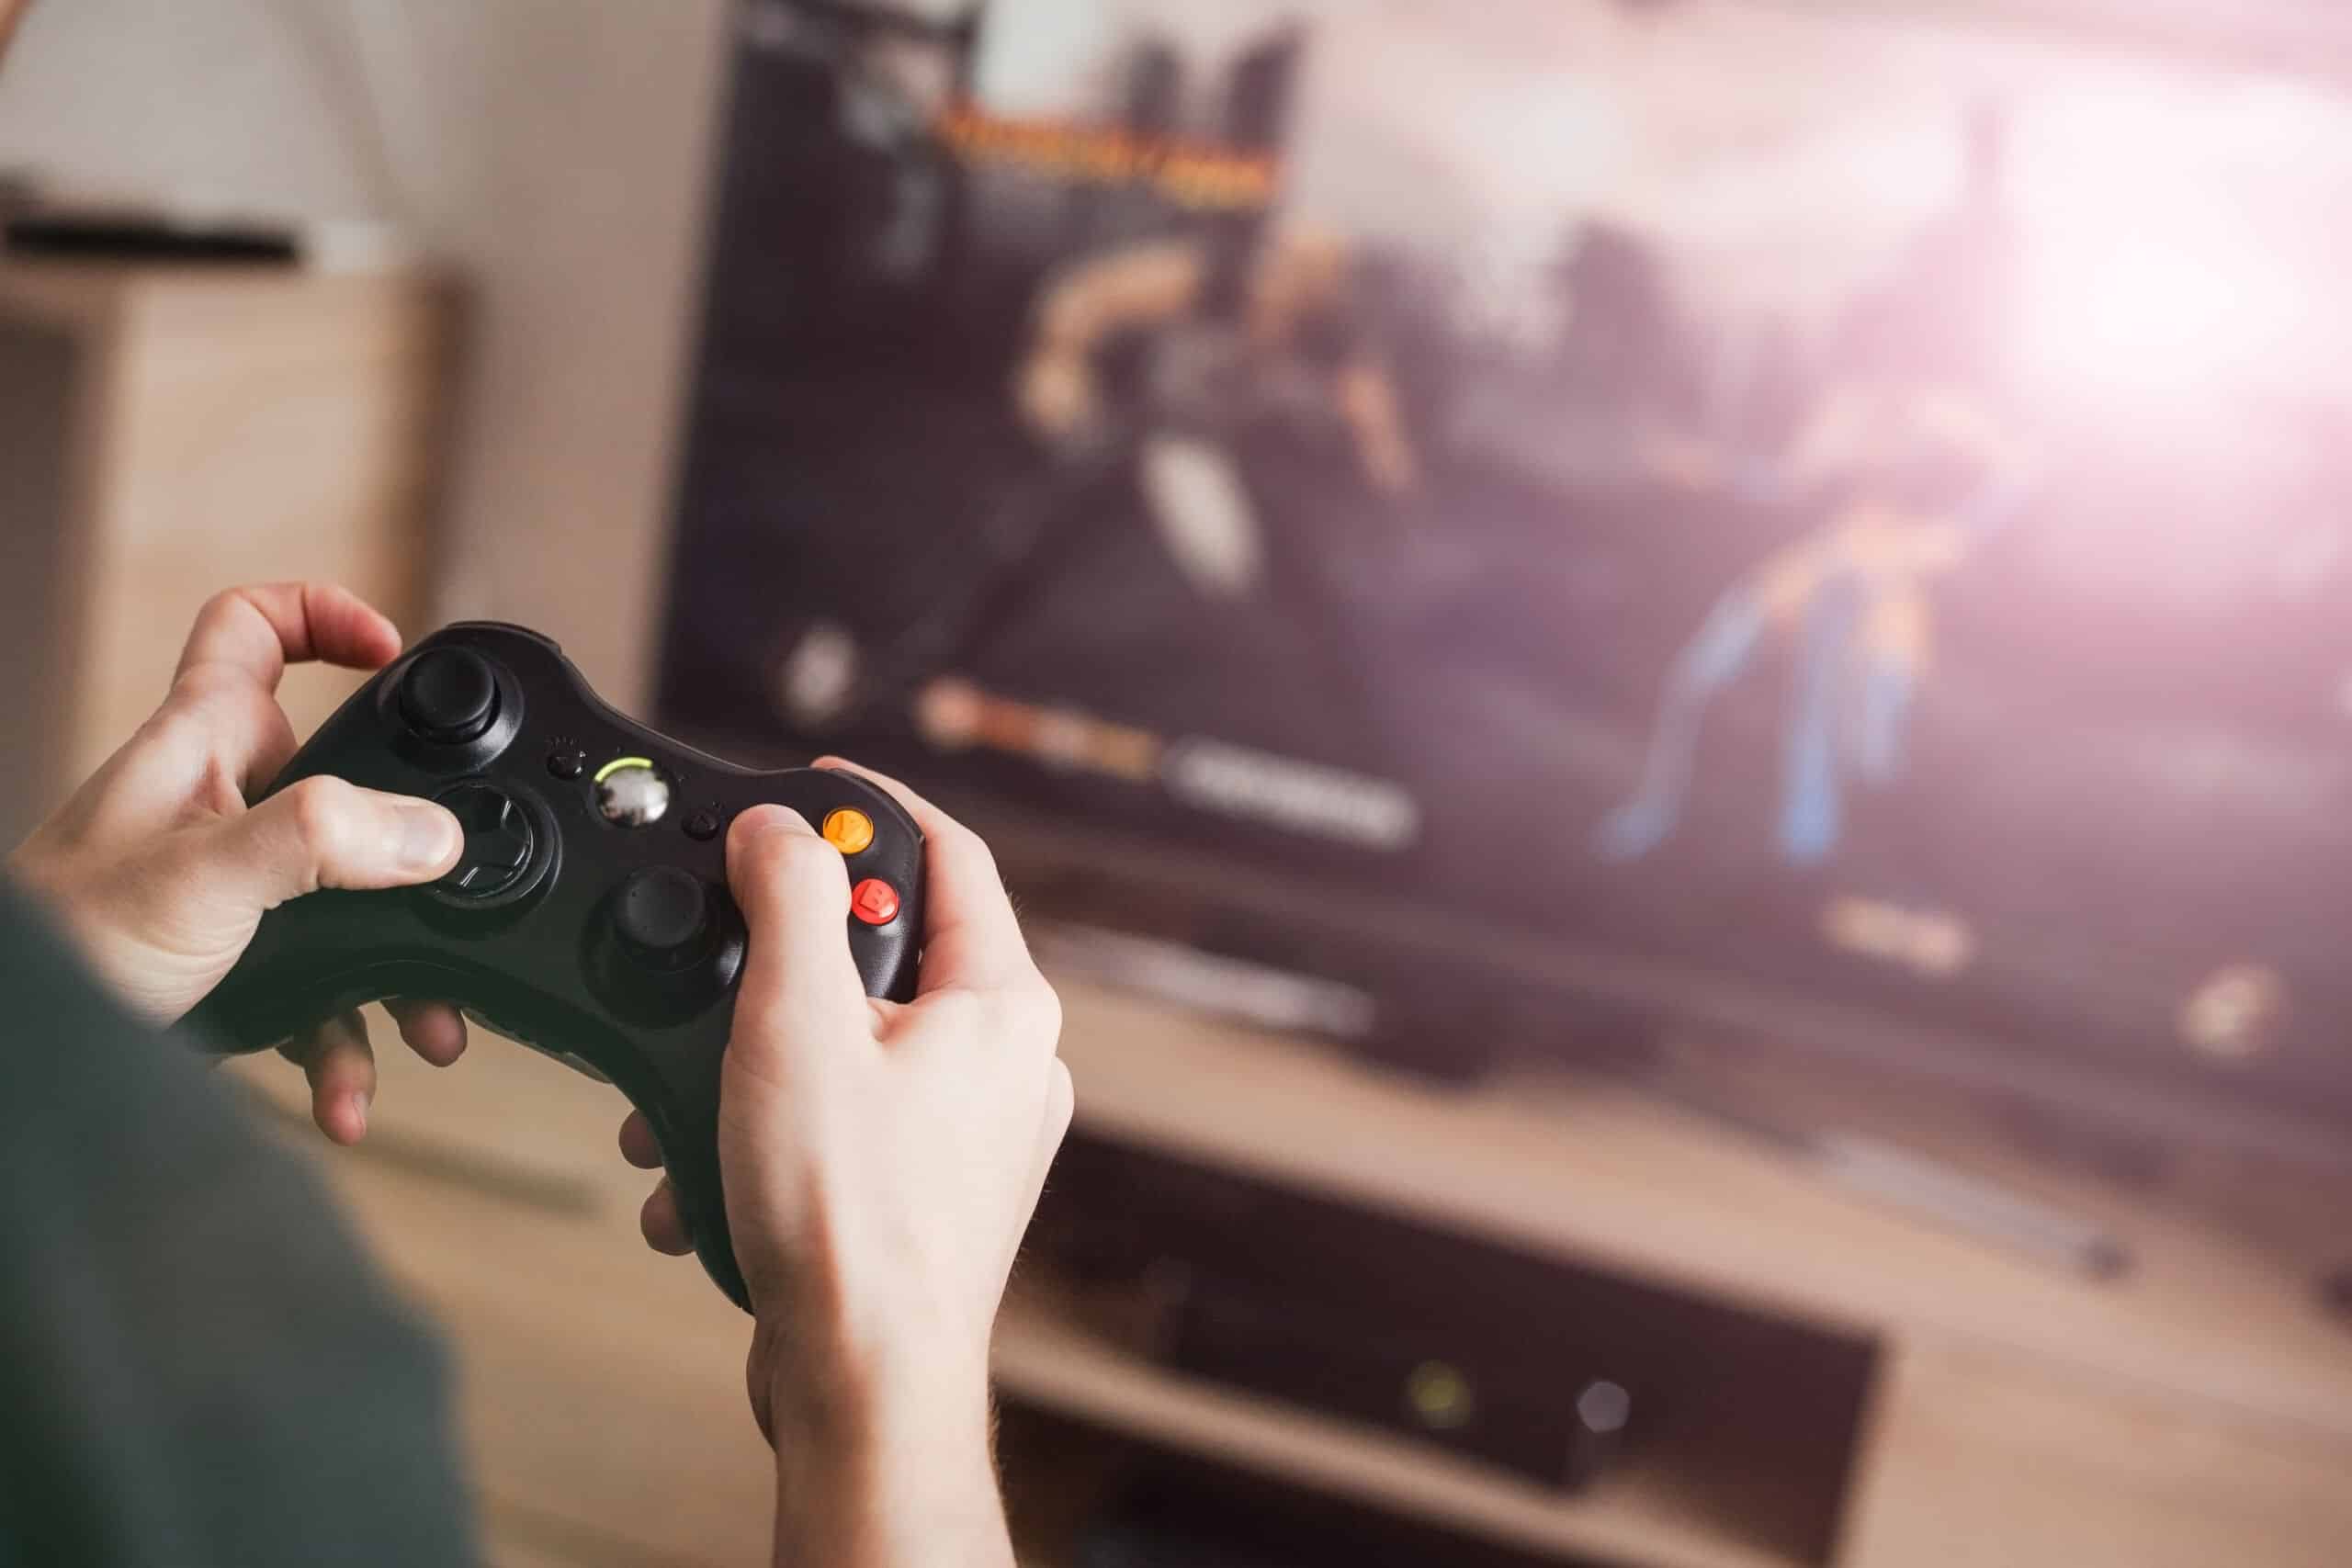 How Can Video Games Be Addictive?